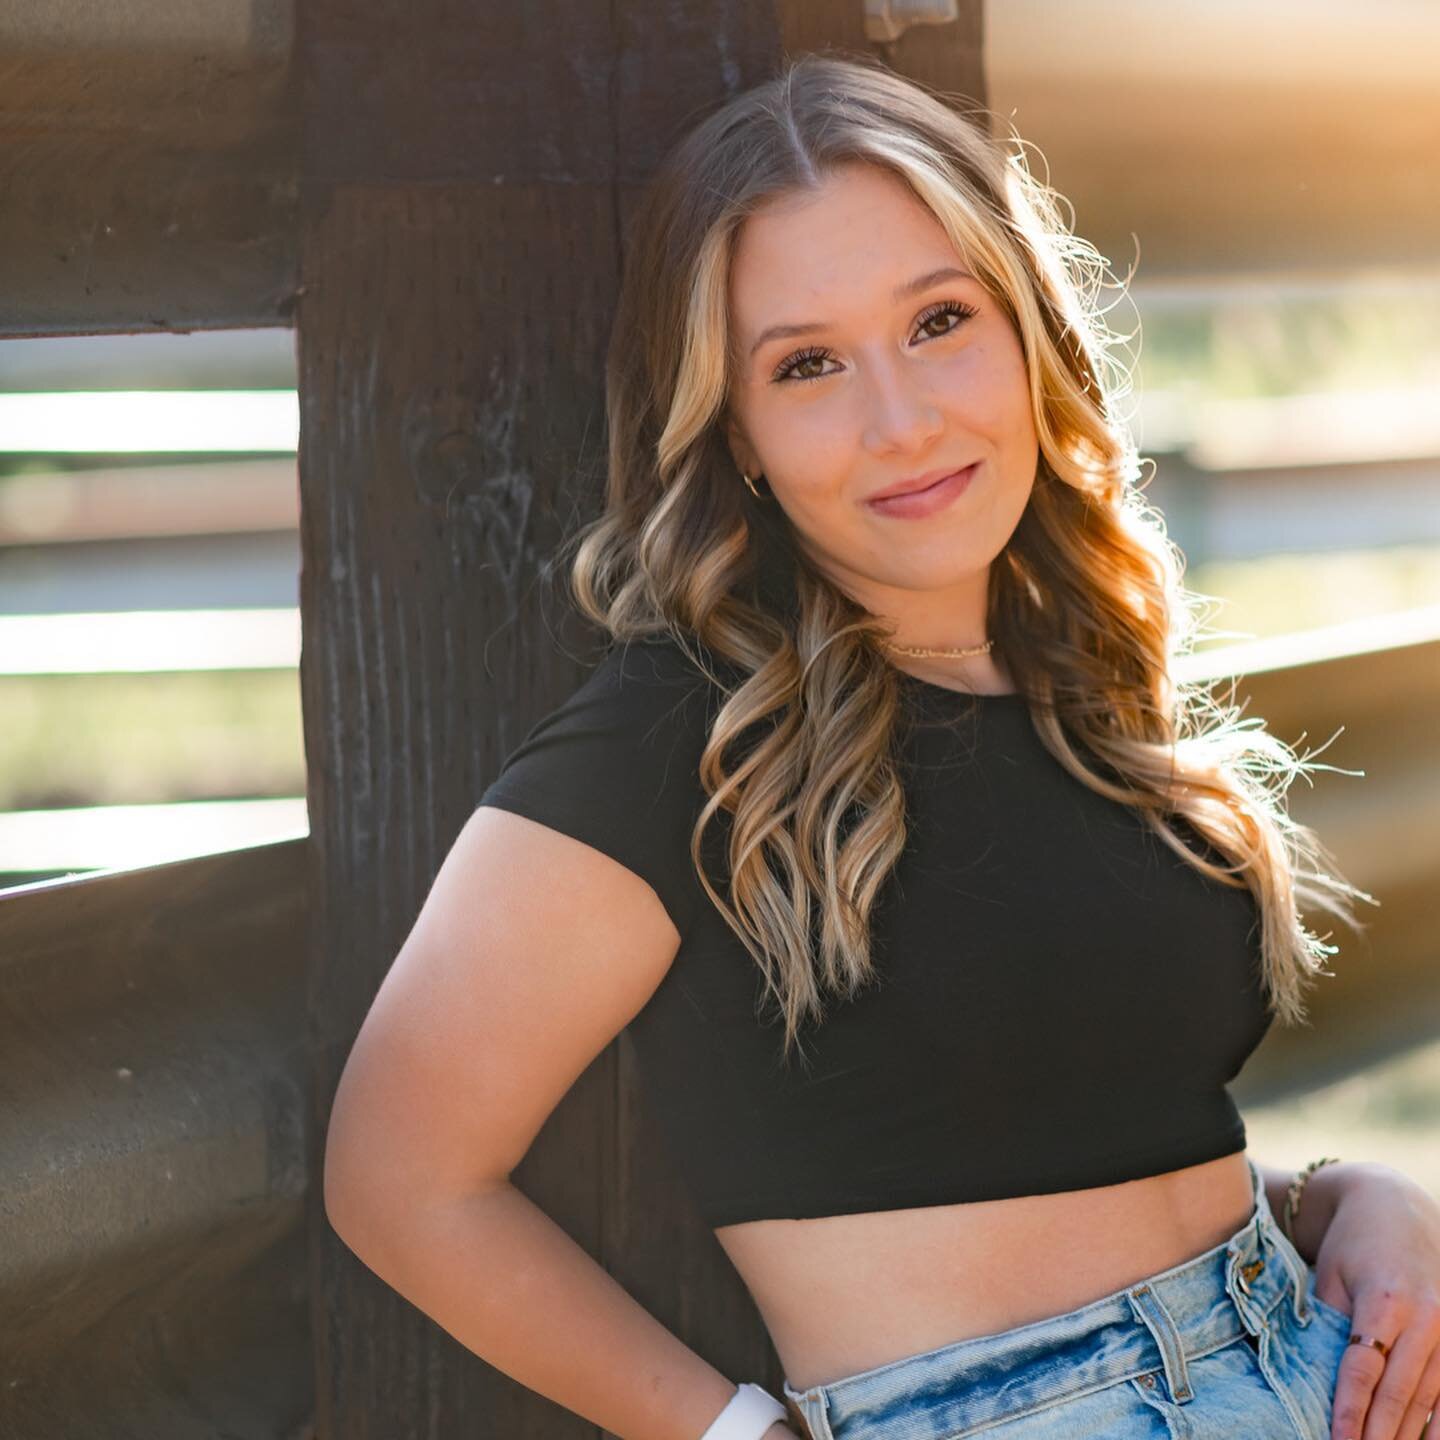 Alyssa's Rep Team Blog Post and Video are now LIVE up on my blog.  Check out the link in my bio @chelseaadamsphoto and leave a comment on the blog post for Alyssa and tell her something you love about her.  She is such an incredible girl, I can't wai